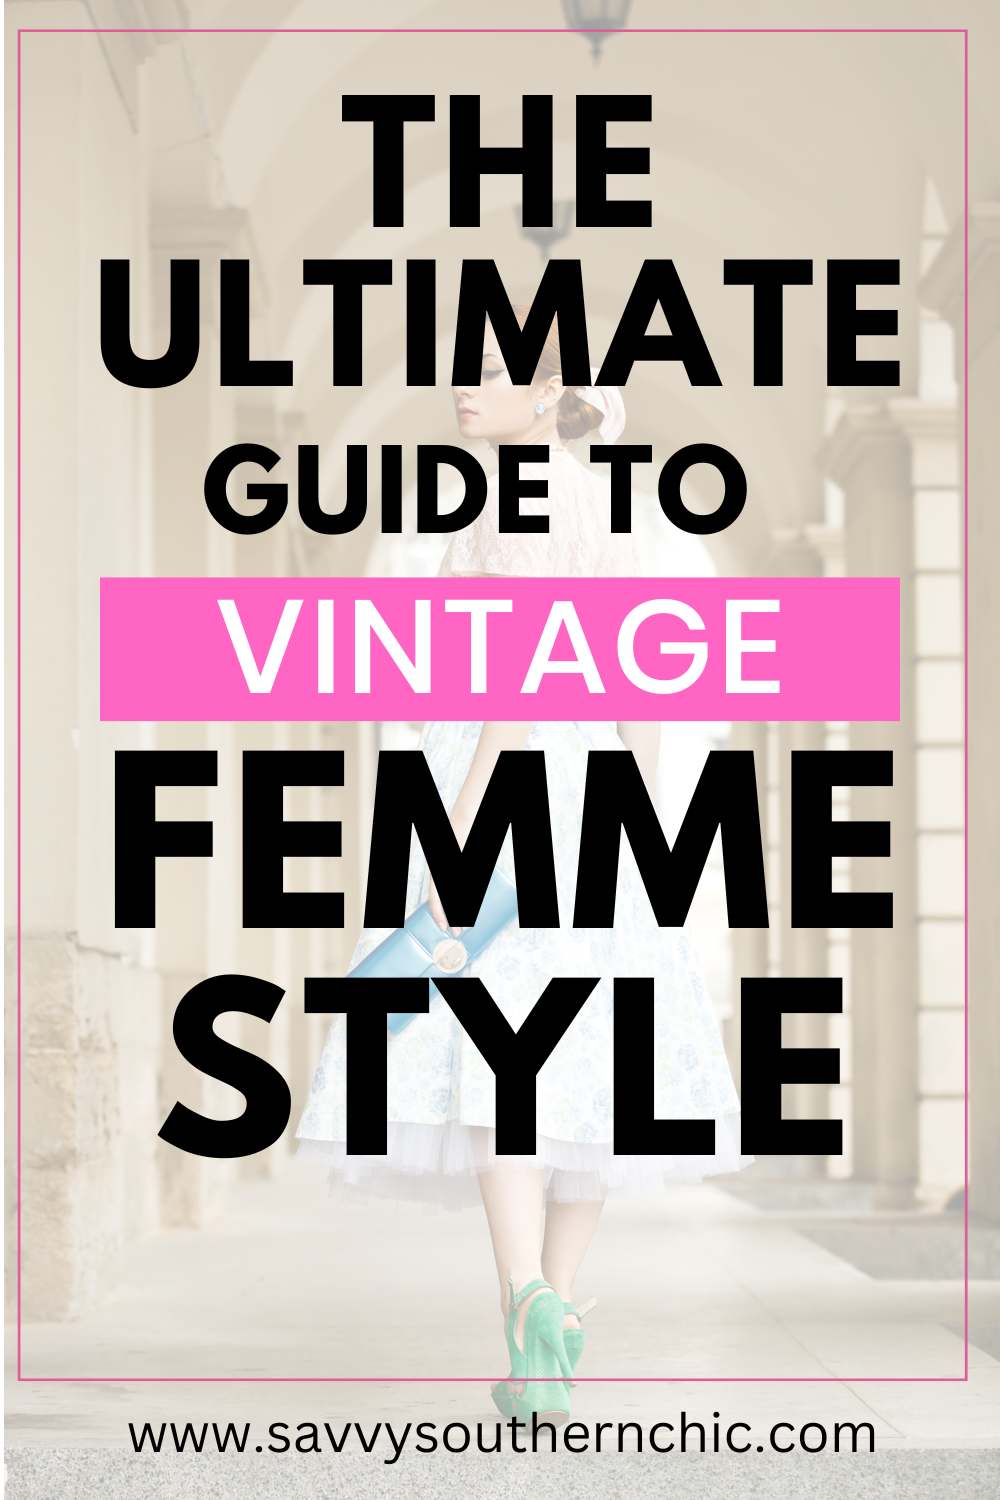 Guide to vintage femme style